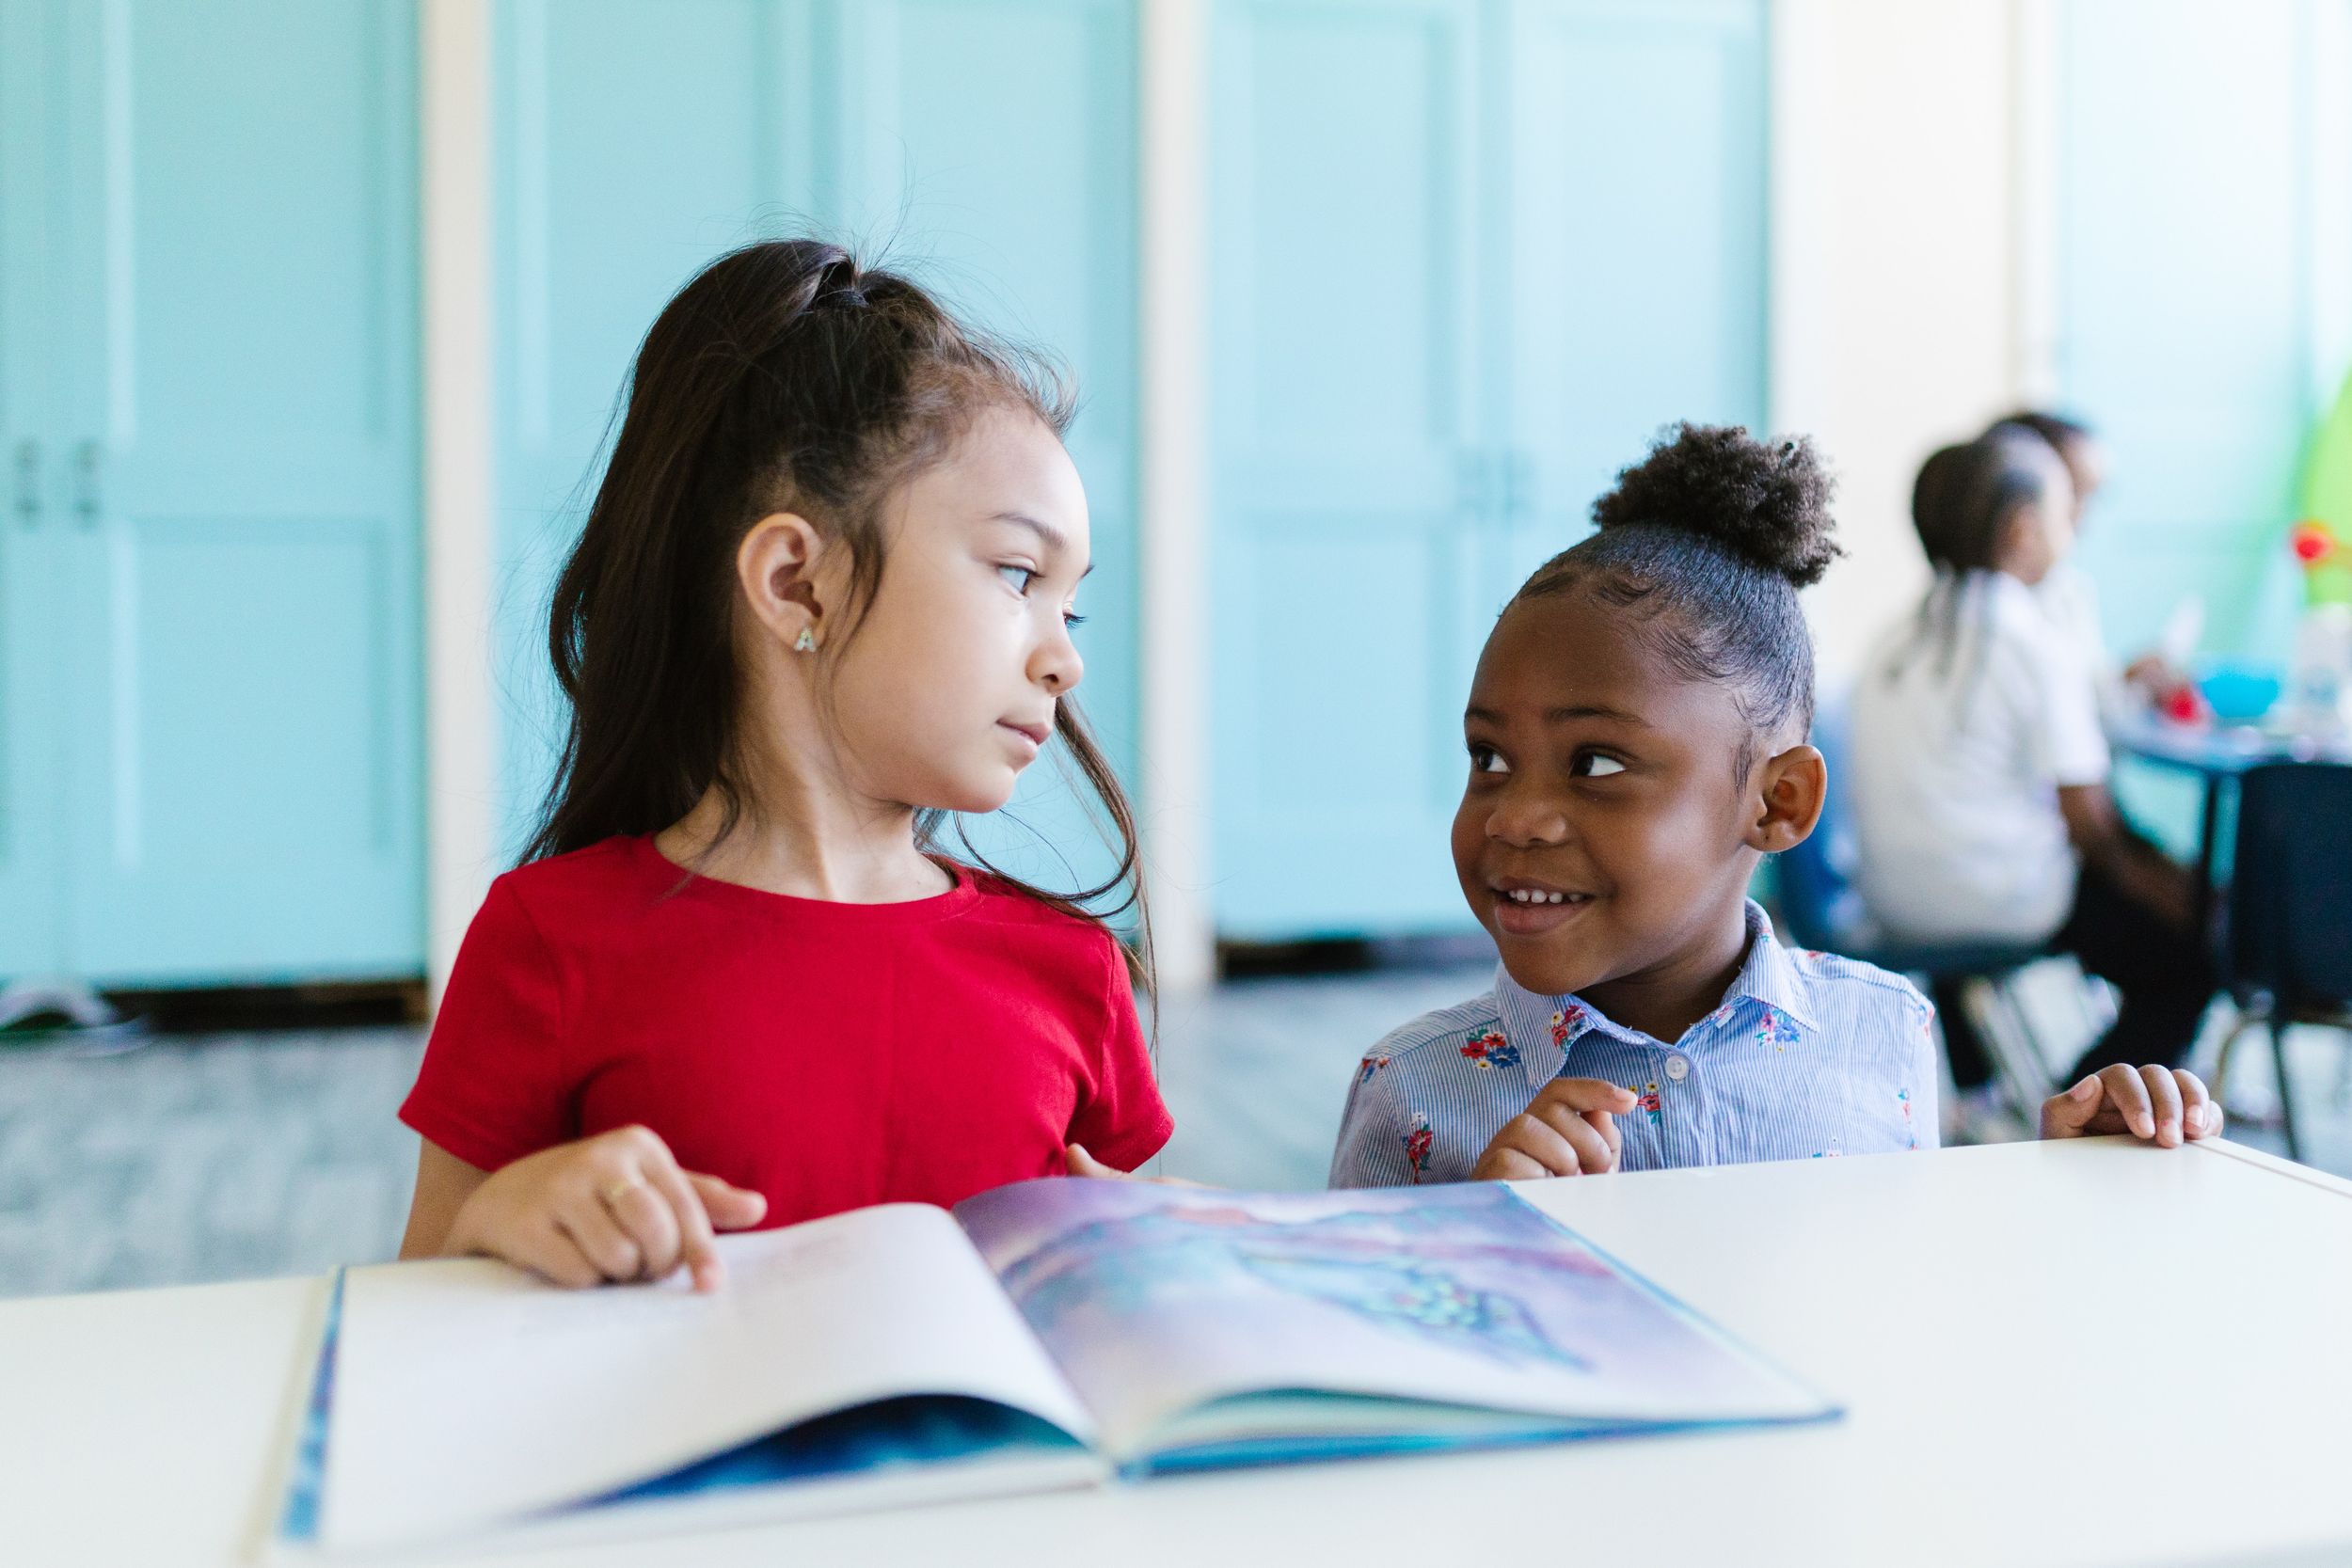 Two little girls stand together and read a book in class.